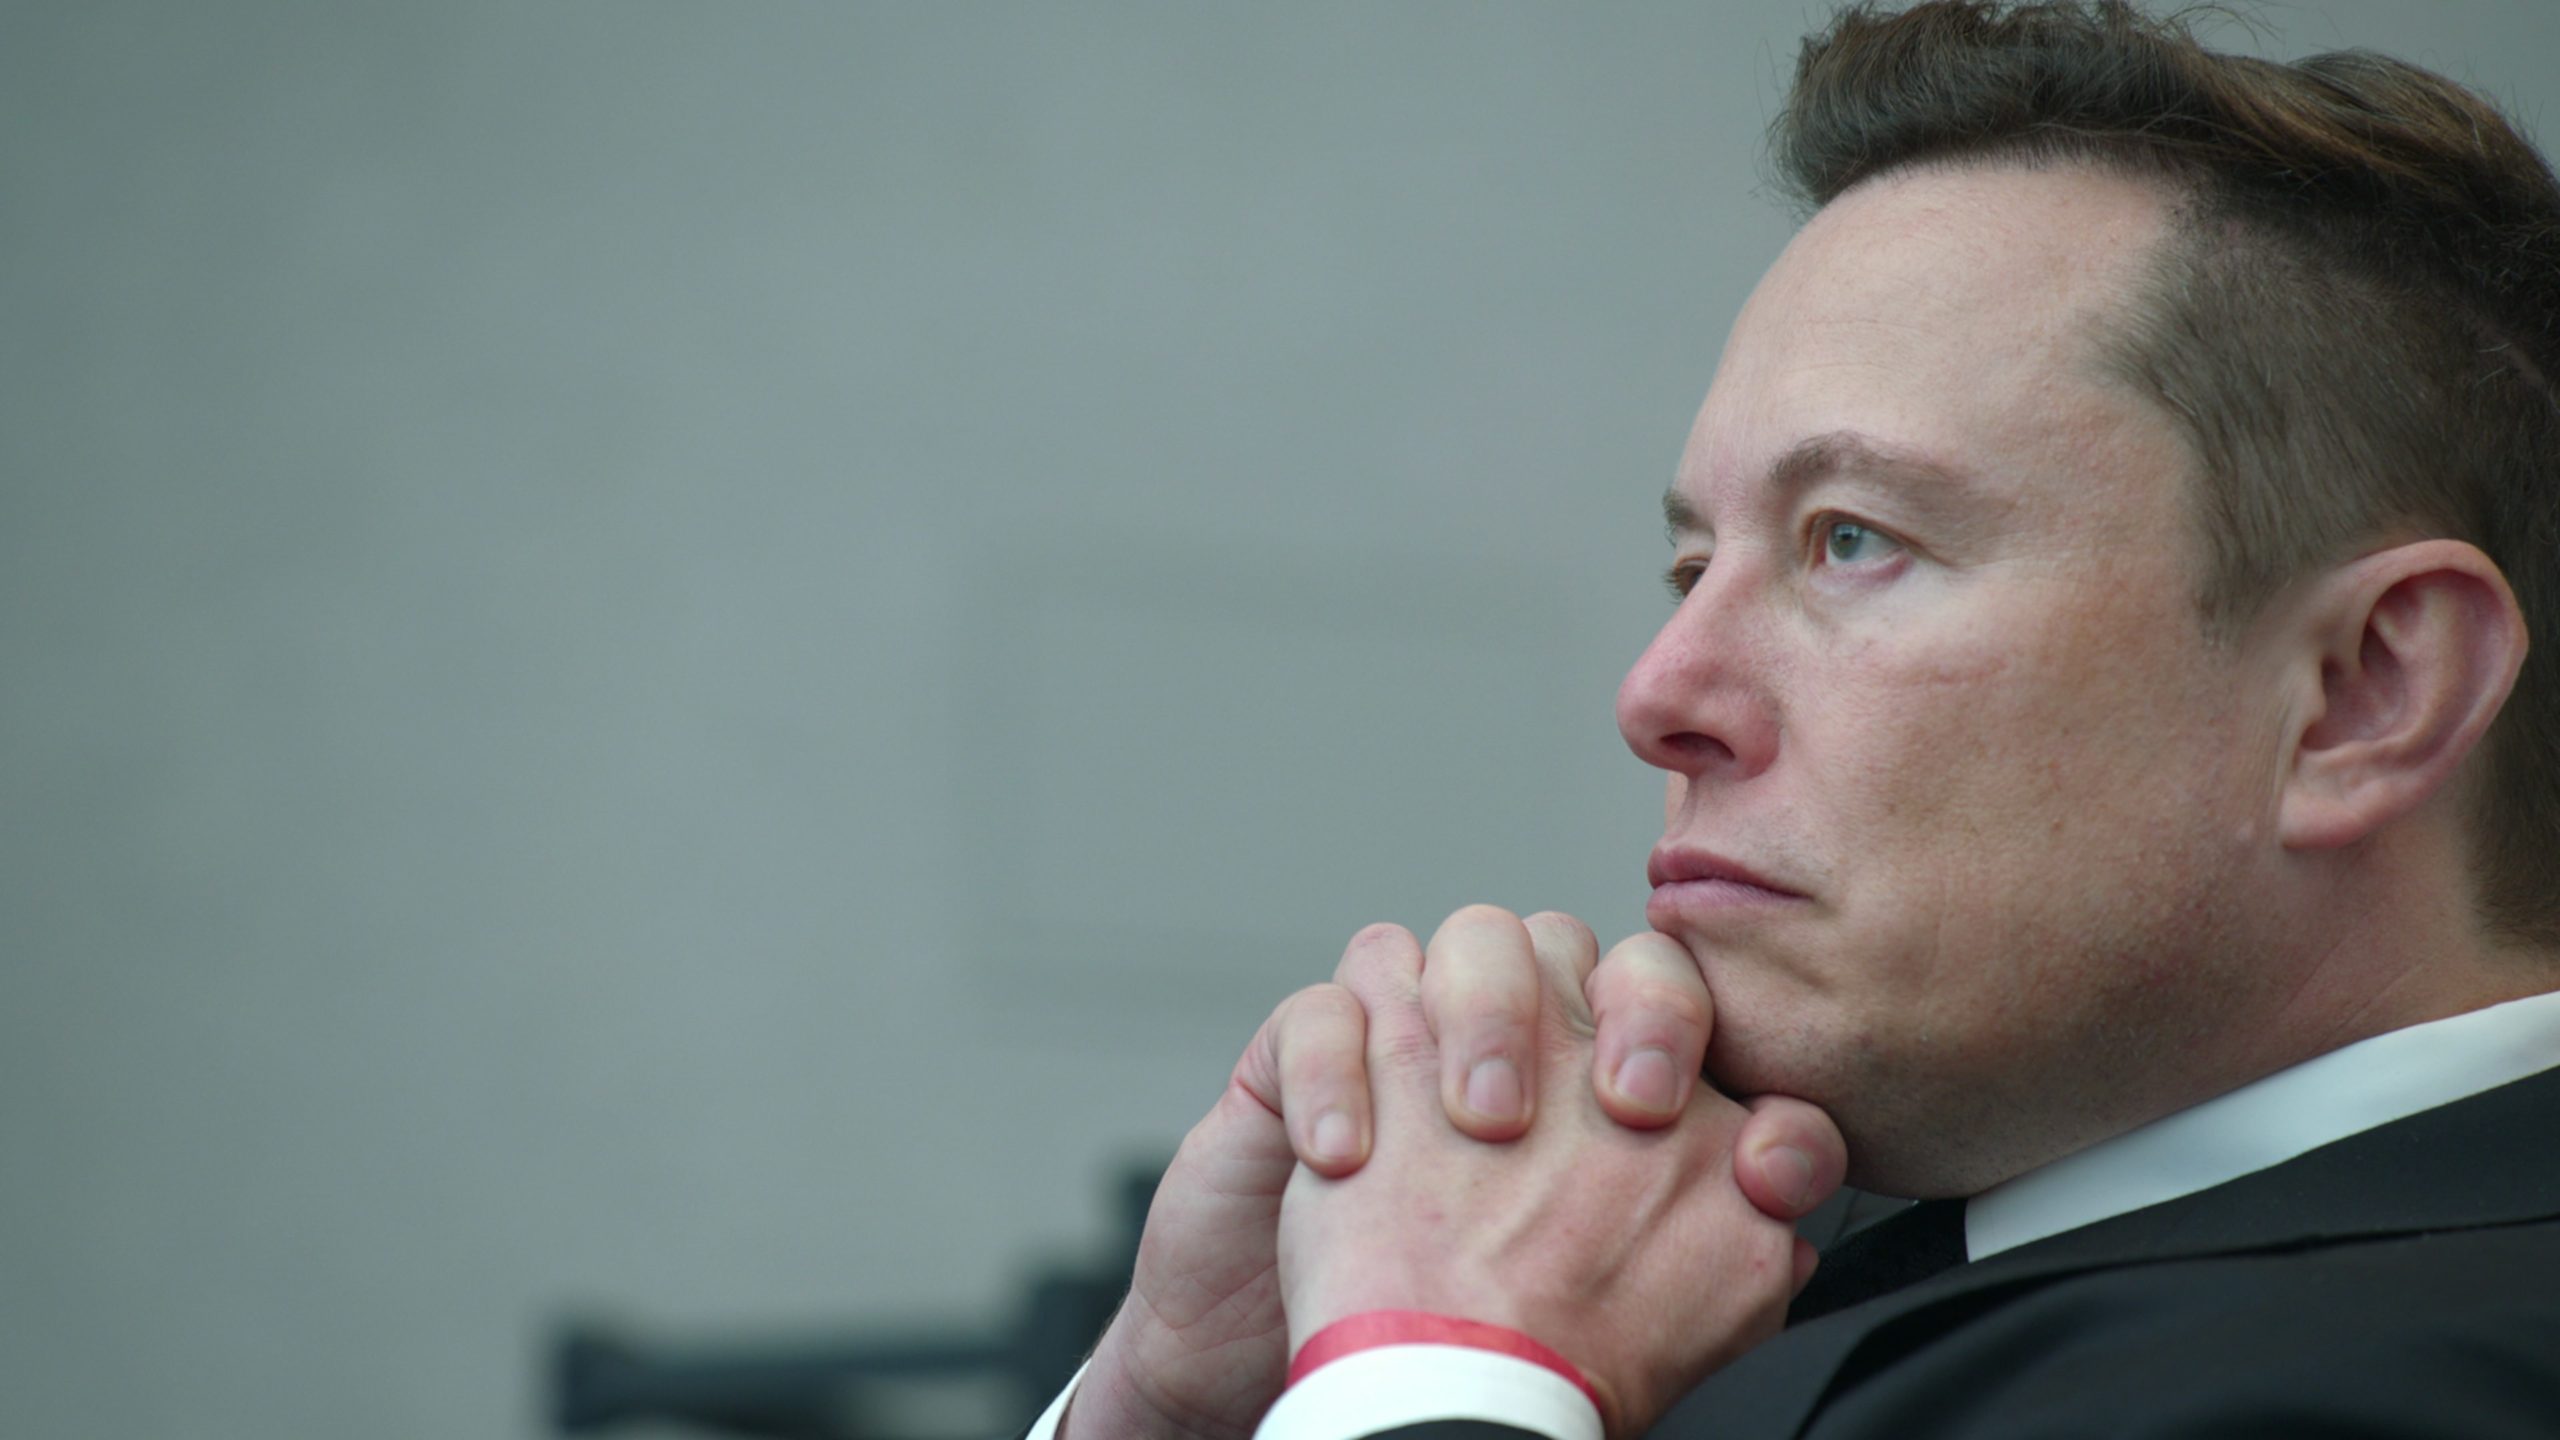 Netflix just released its new Elon Musk documentary Return to Space